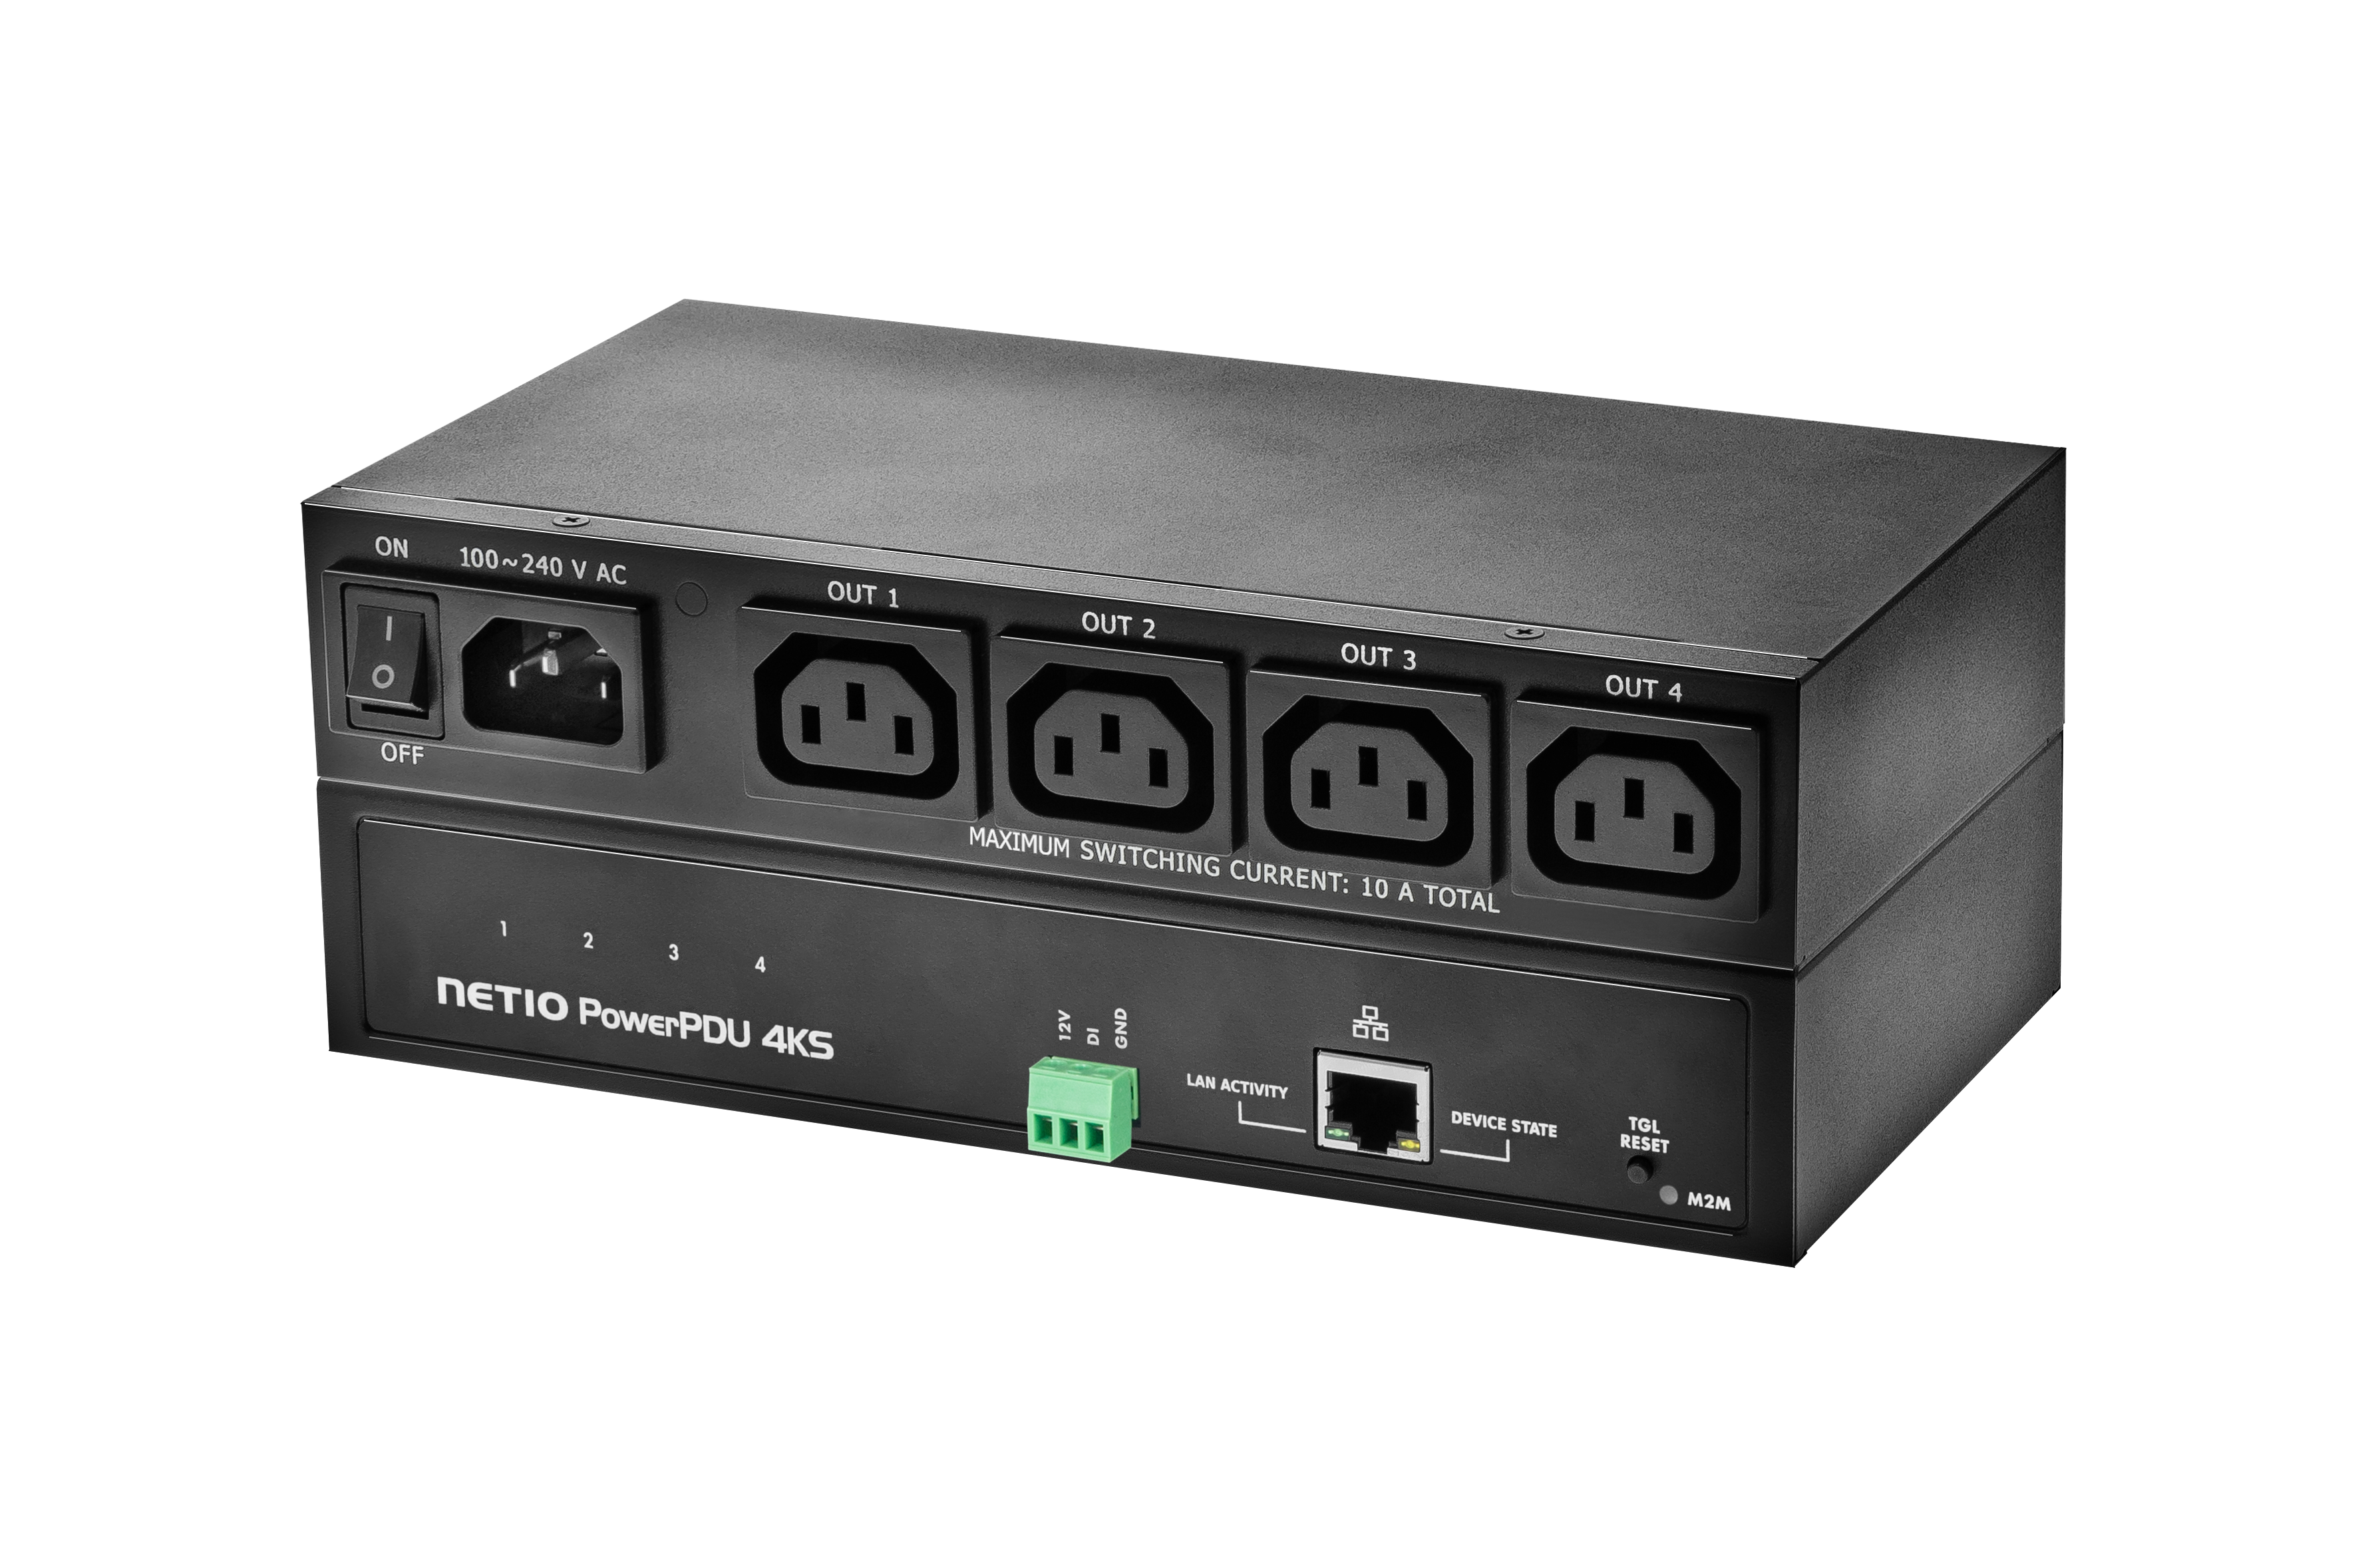 Netio PowerPDU 4KS in PaperBox without any power-cable included. PDU with 4*C13 power output, each output metered + switched individually, 1*DI, ZCS. PDU supports NETIO Coud + WatchDog, scheduler, several M2M APIs, SNMPv1 &amp; MQTT-flex supported